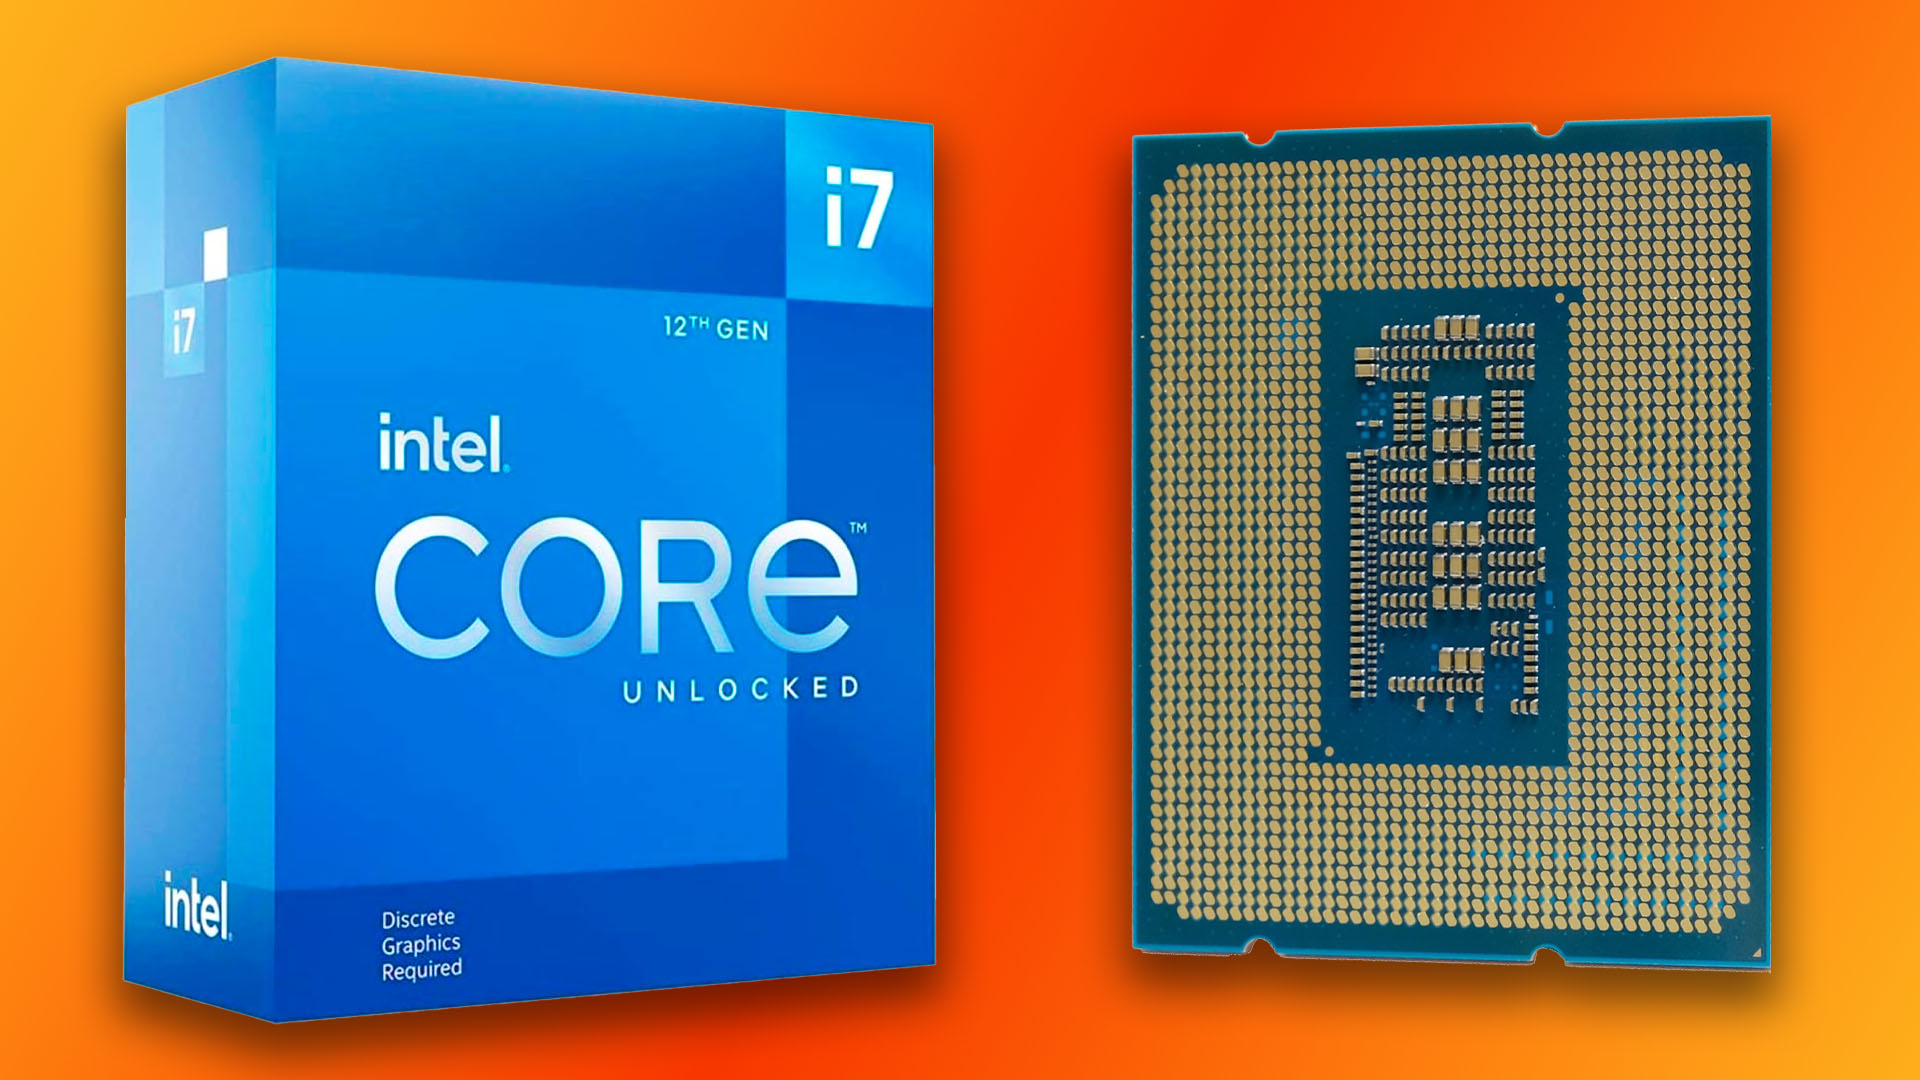 The price of this Intel Core i7 gaming CPU just dropped below $200